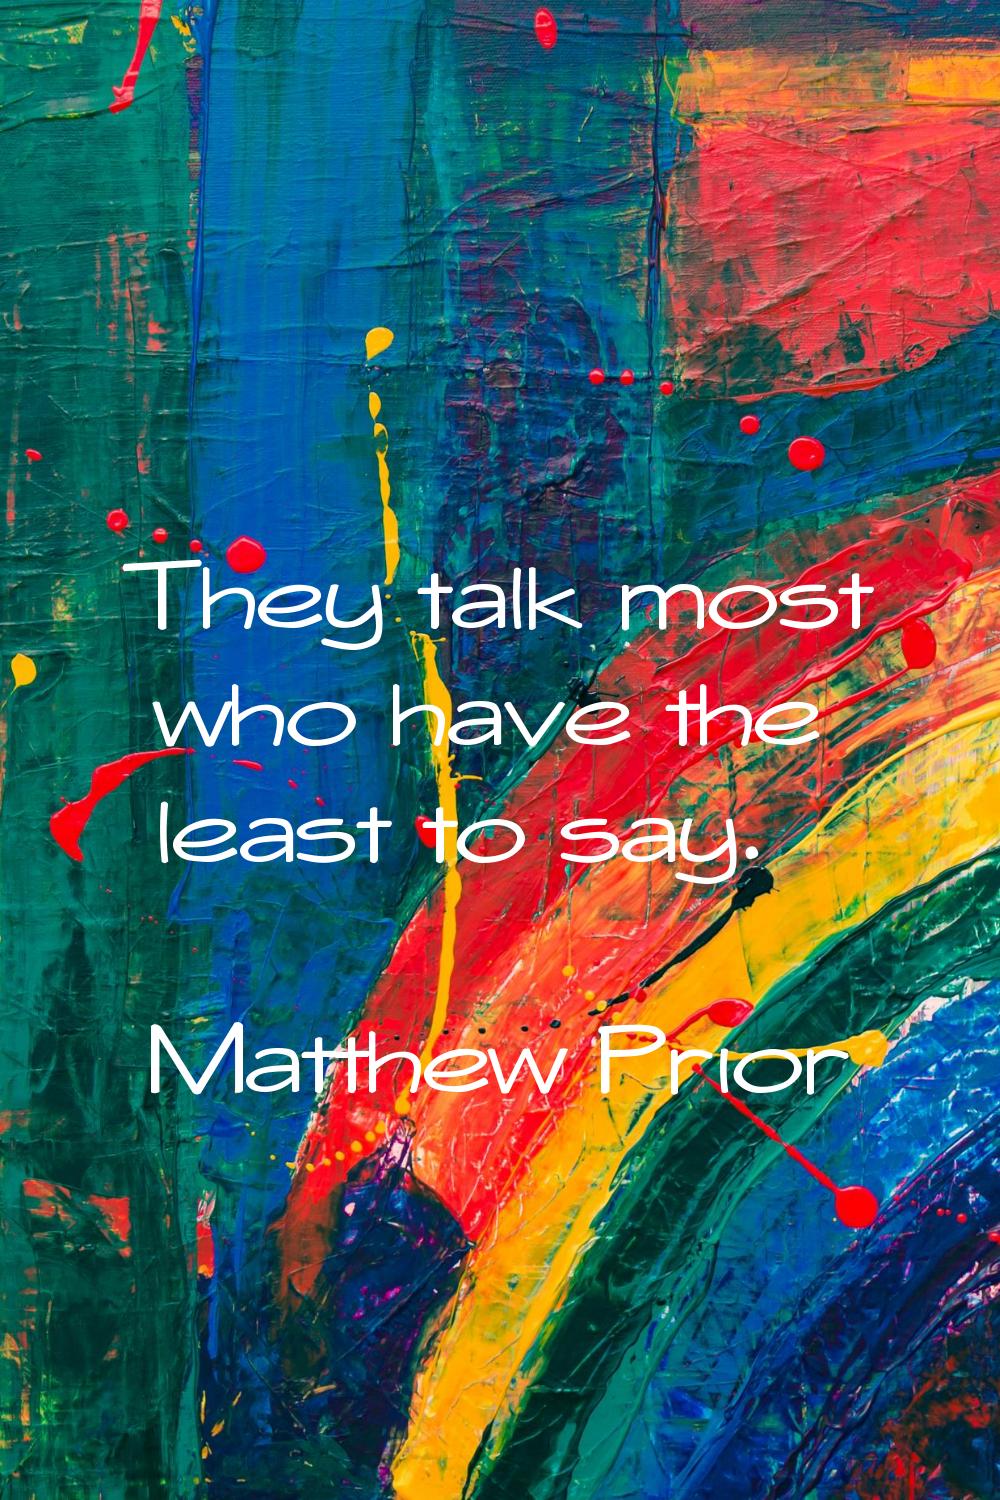 They talk most who have the least to say.